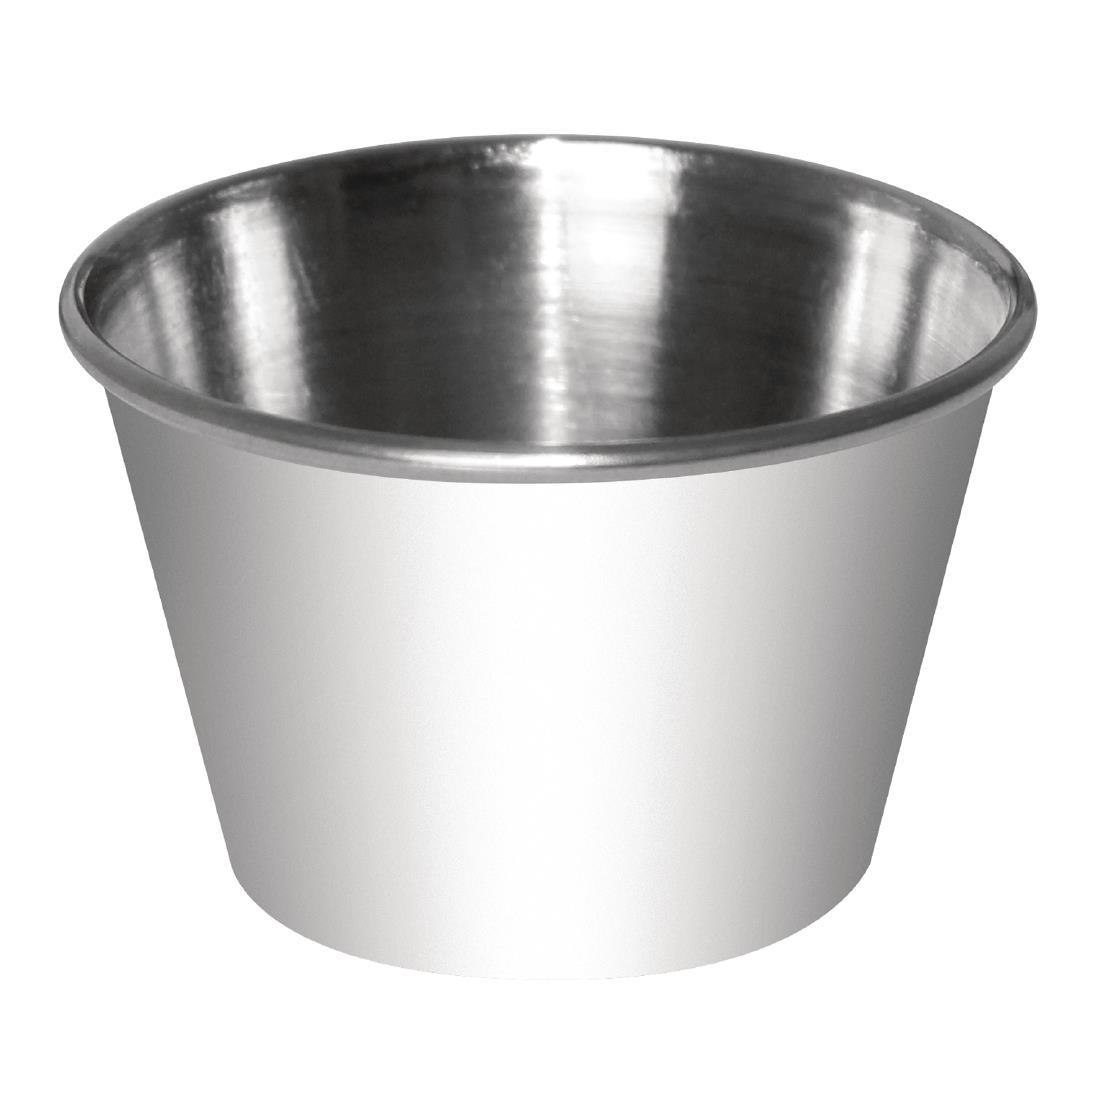 Stainless Steel 70ml Sauce Cups (Pack of 12) - GG878  - 1